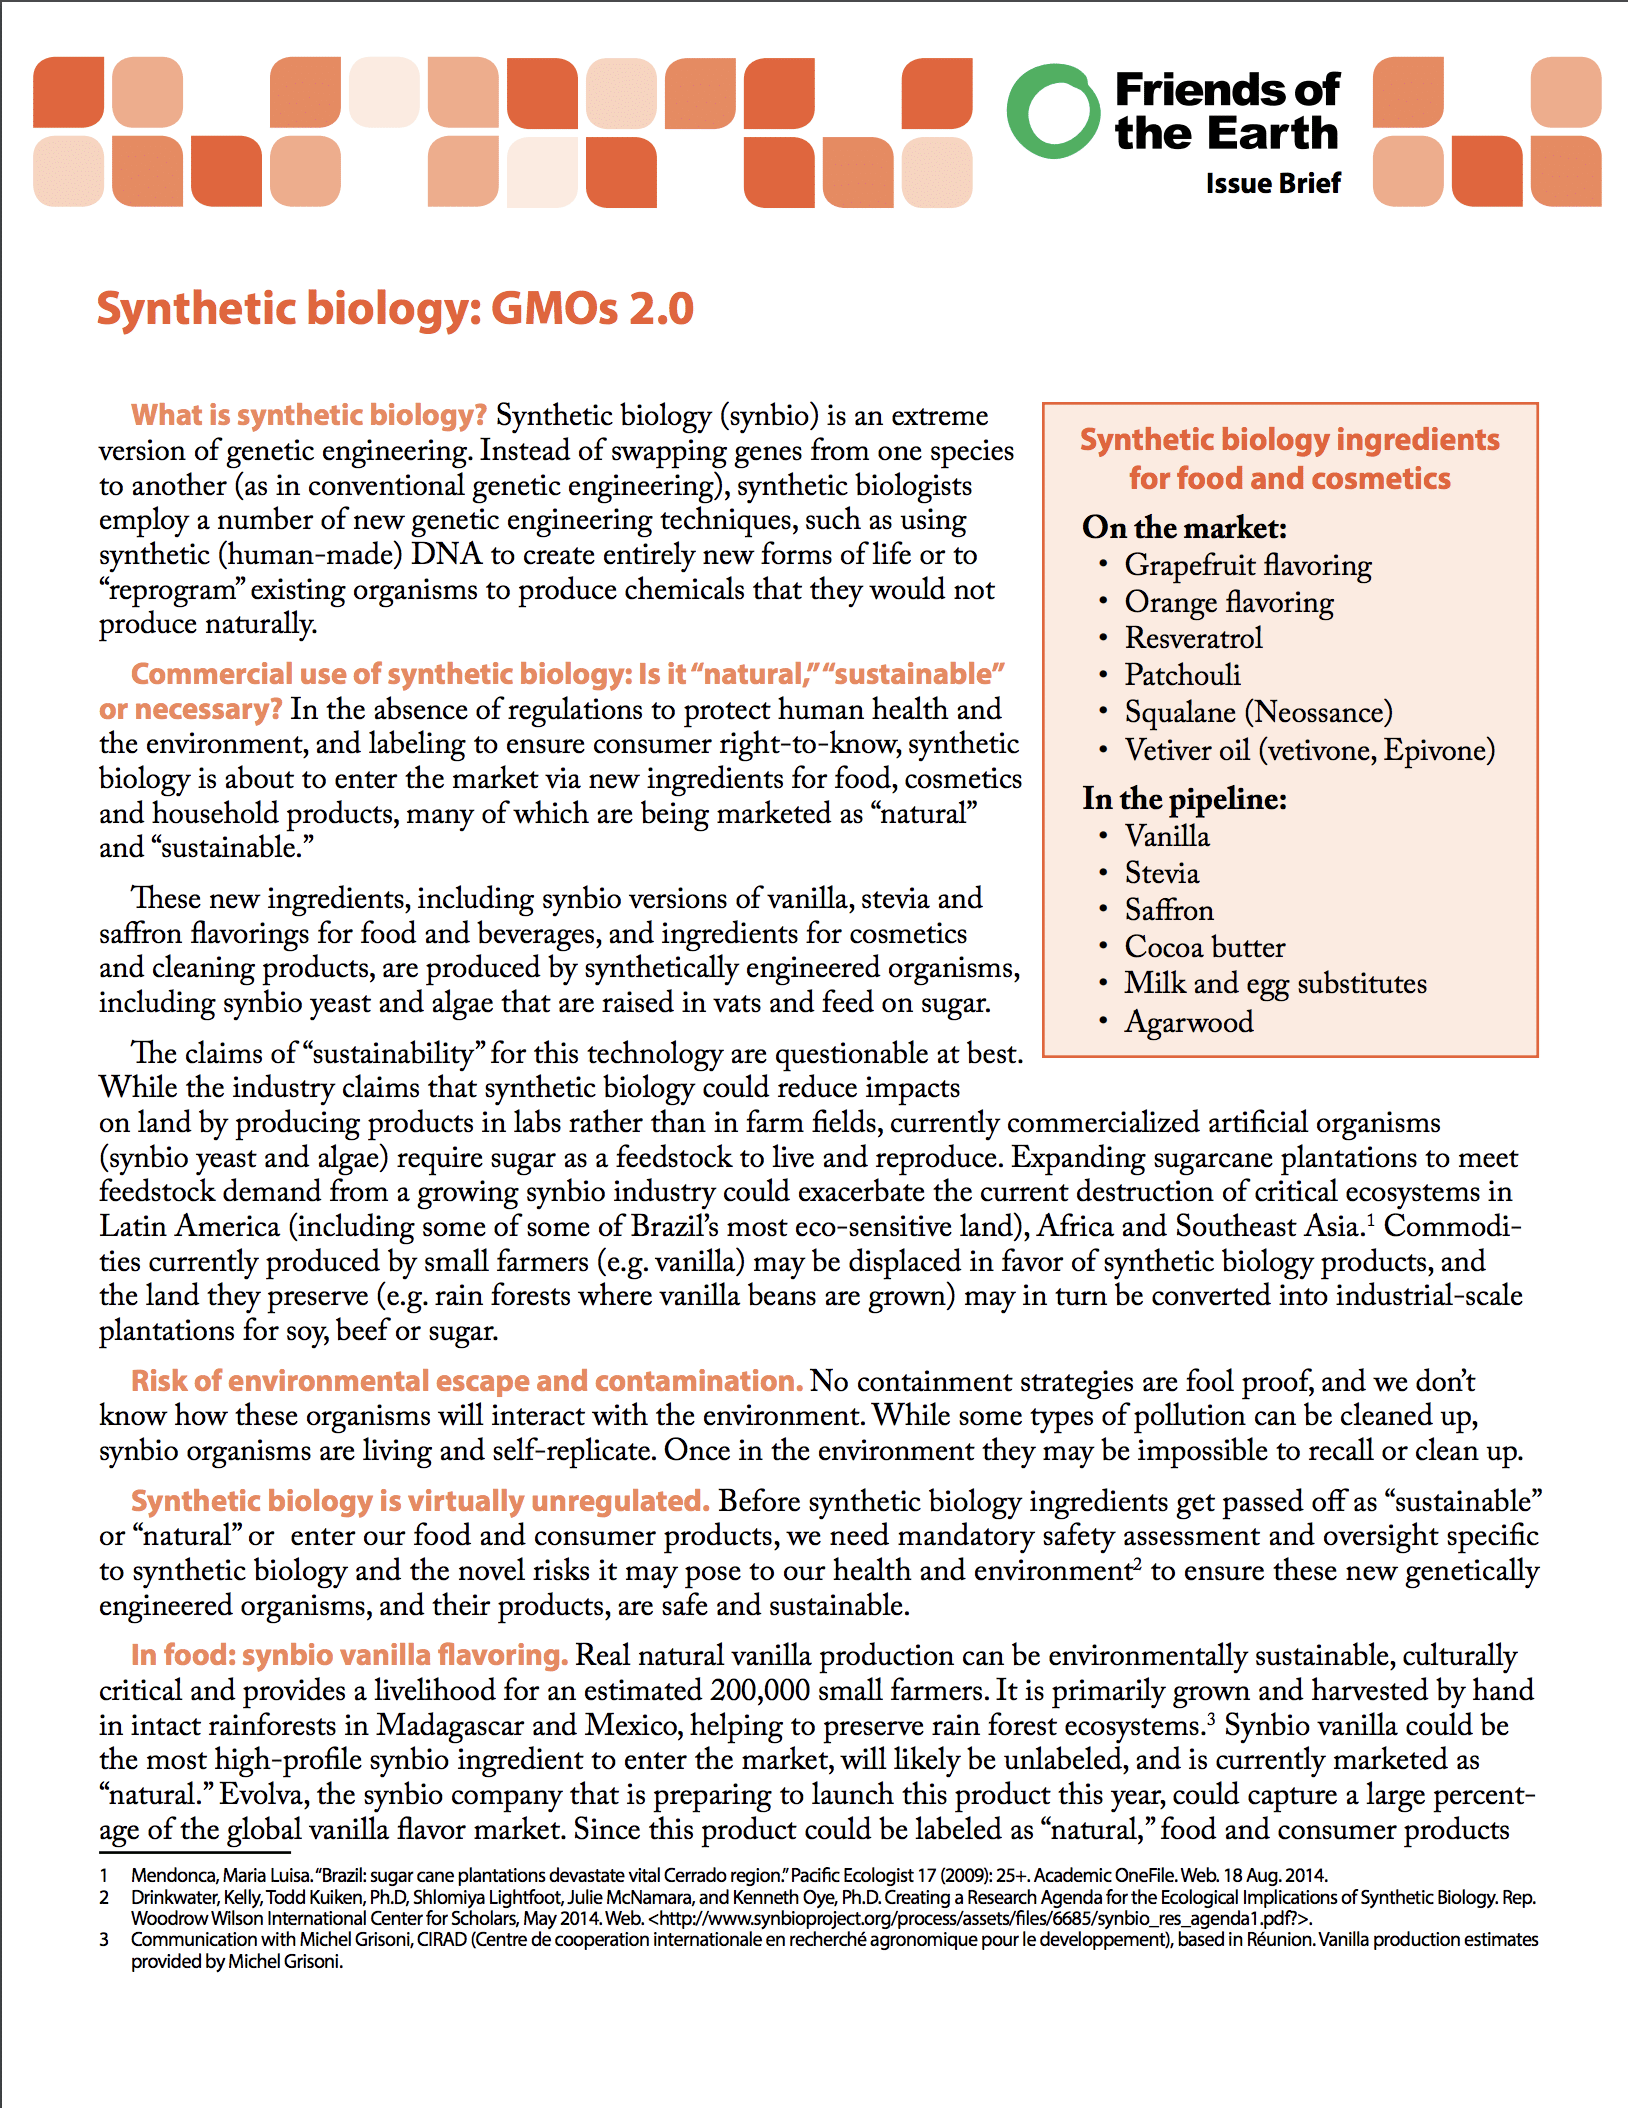 GMOs 2.0: Synthetic Biology Issue Brief